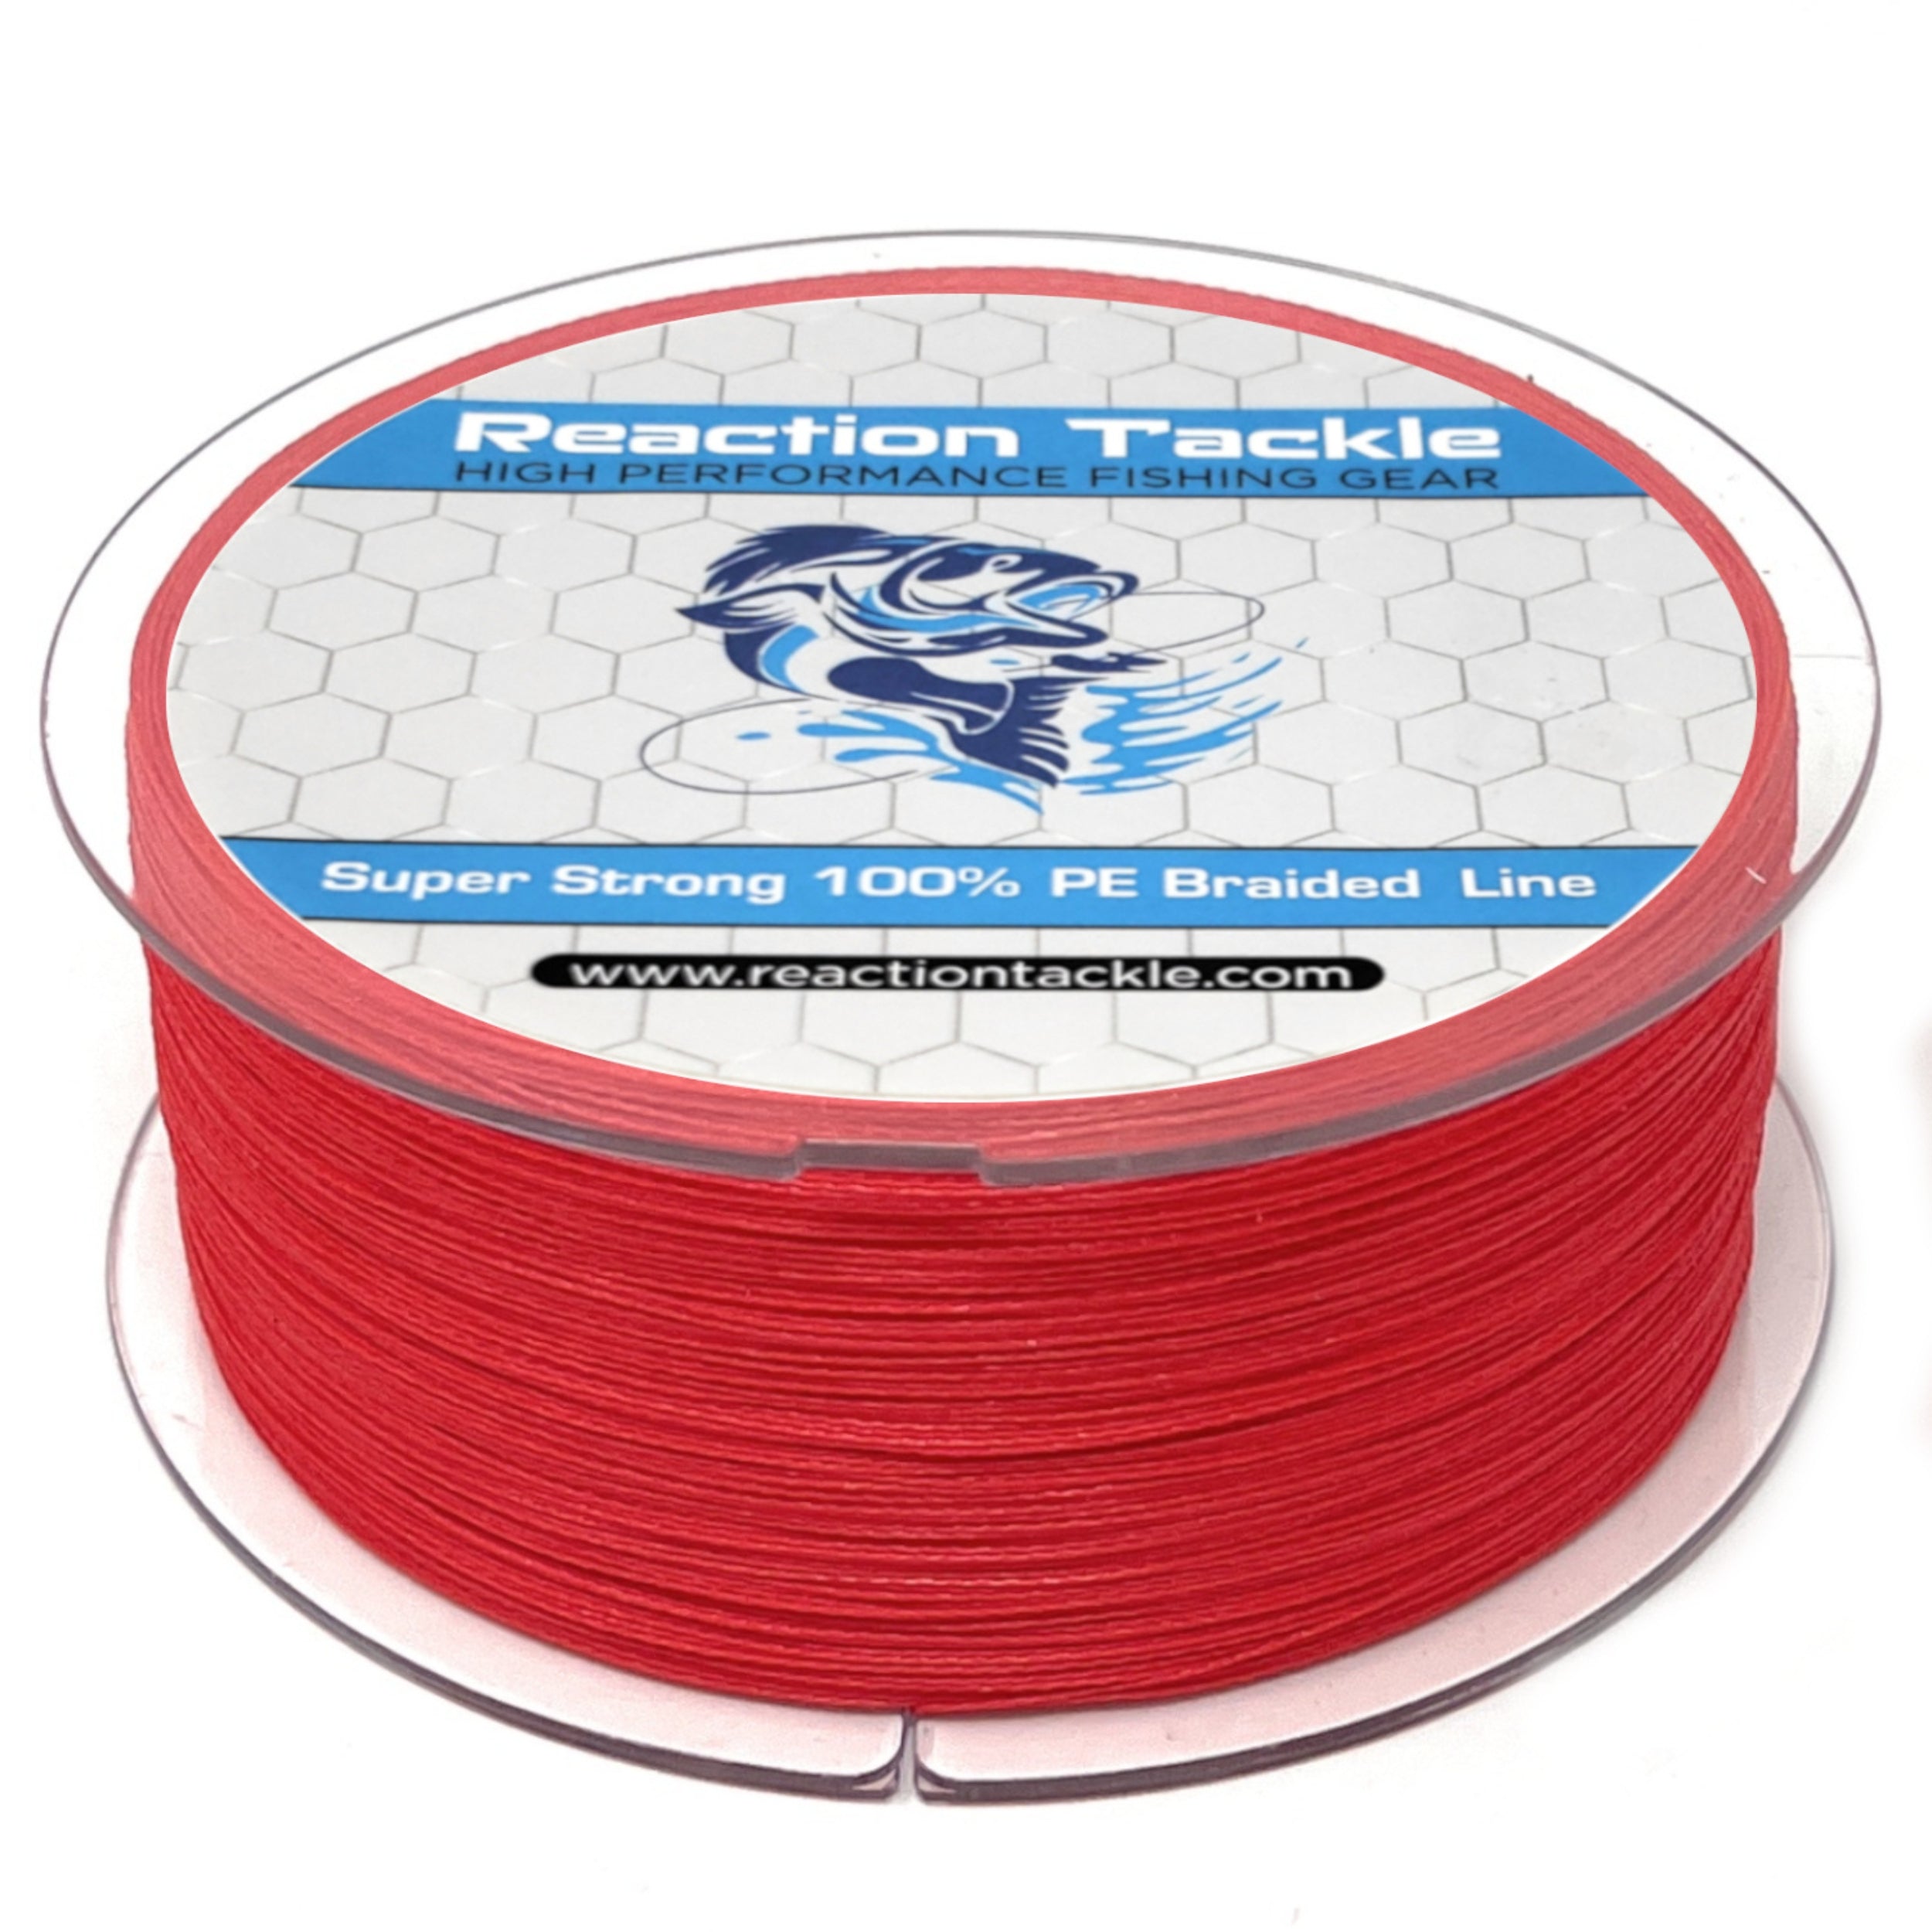 Reaction Tackle Braided Fishing Line Dark Blue 80LB 500yds 